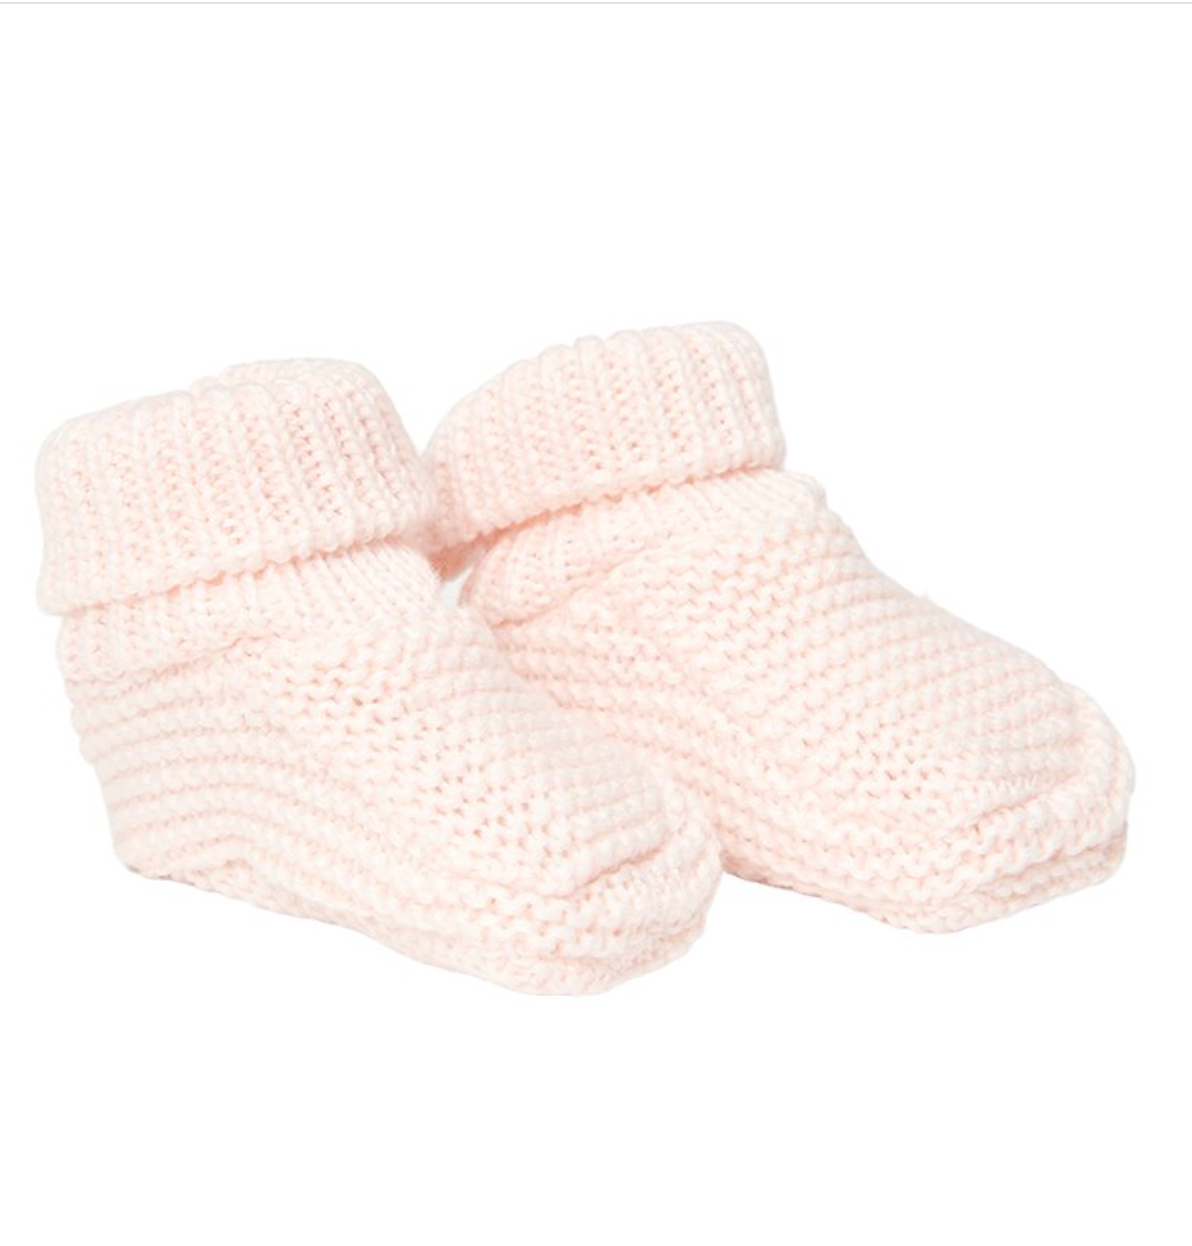 Little Dutch Knitted Baby Booties